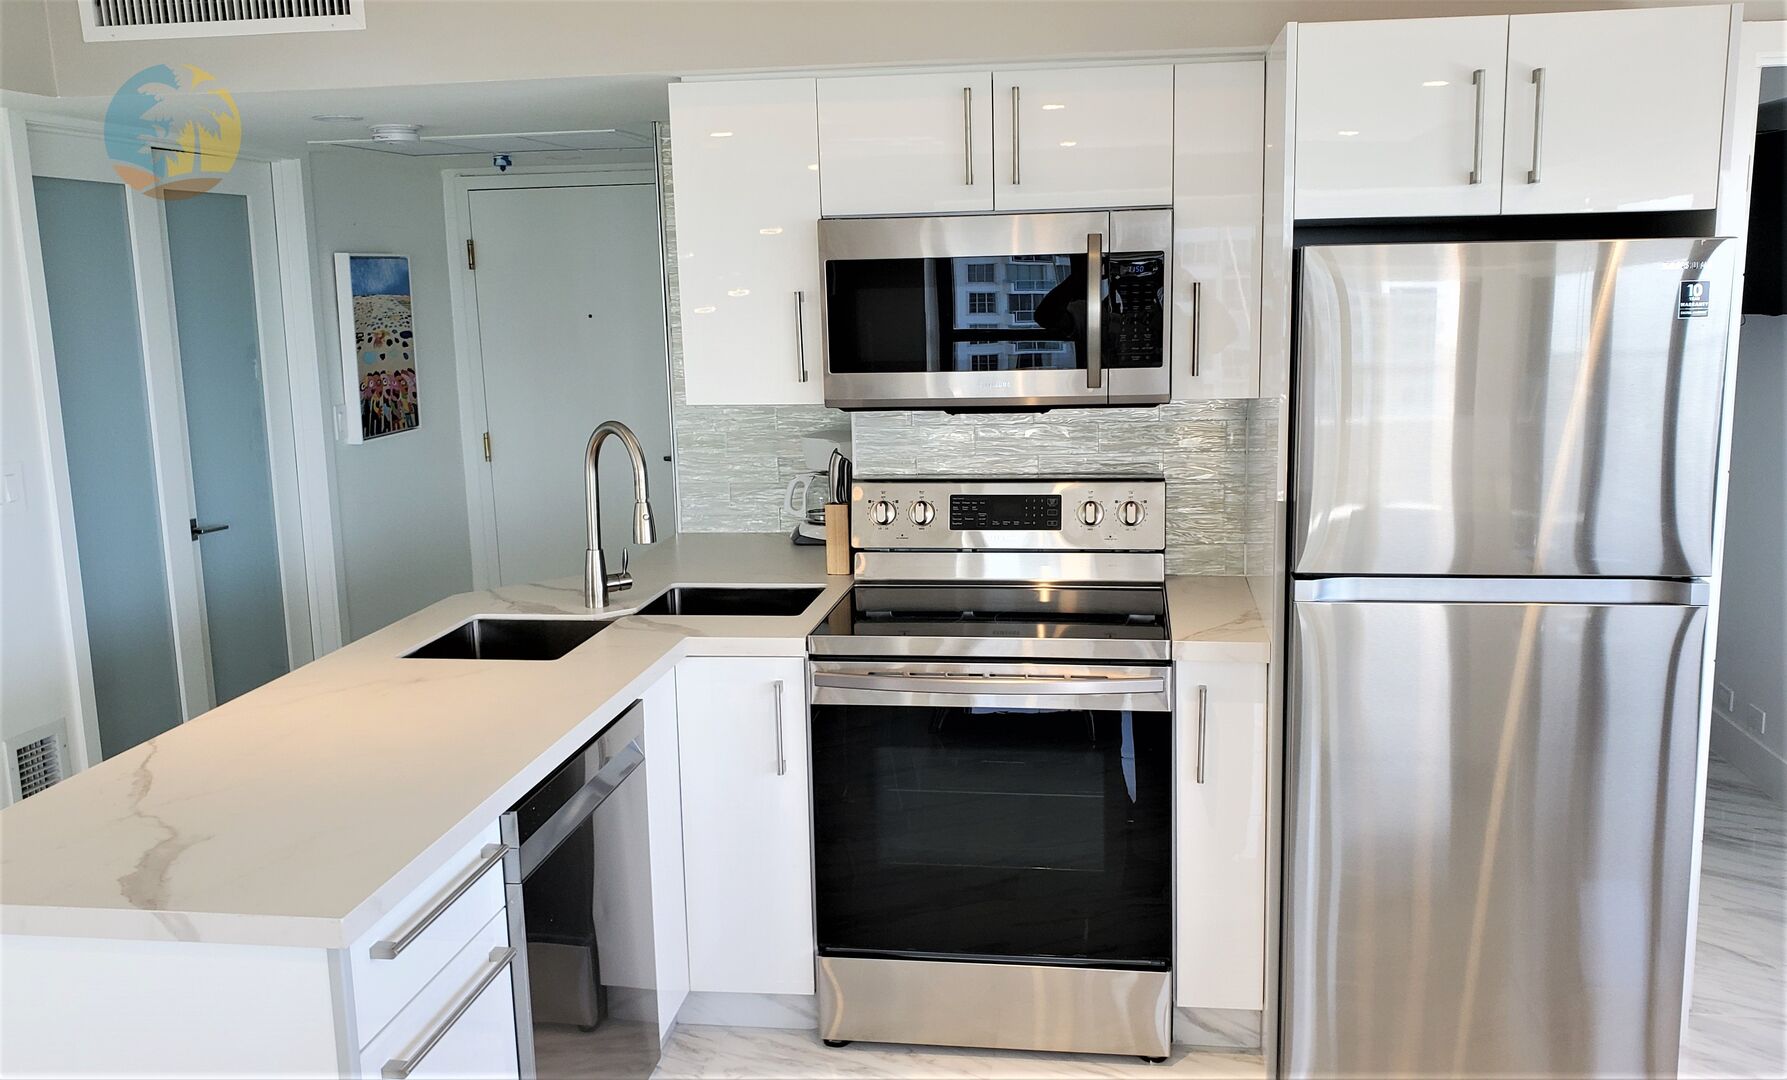 Fully Equipped Kitchen, double stainless sink, solid surface counter.